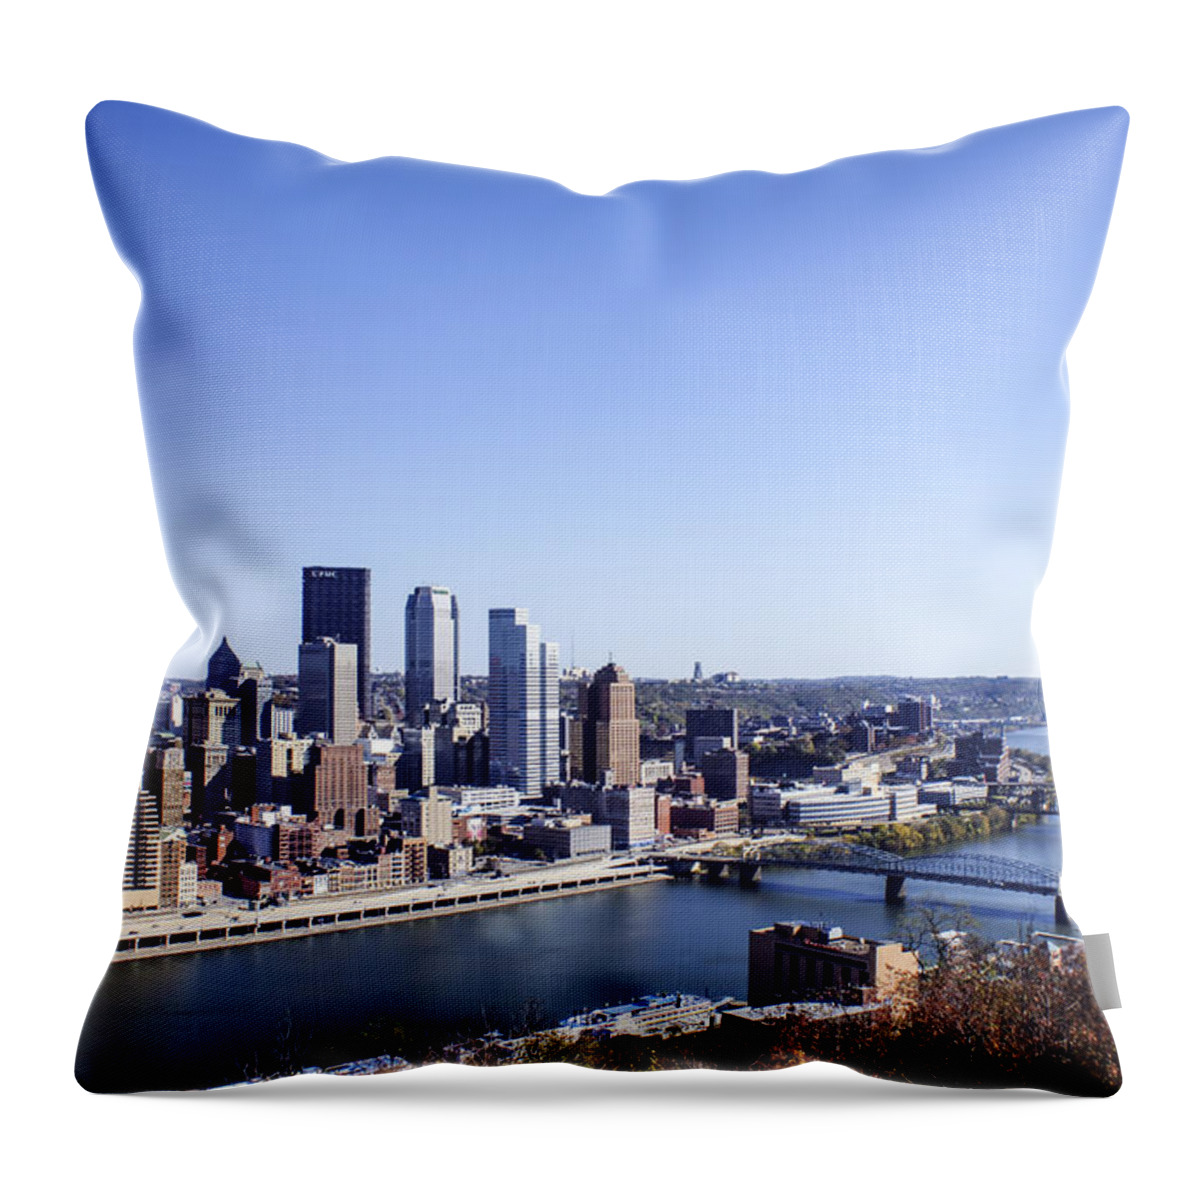 Pittsburgh Throw Pillow featuring the photograph Pittsburgh South by Michelle Joseph-Long